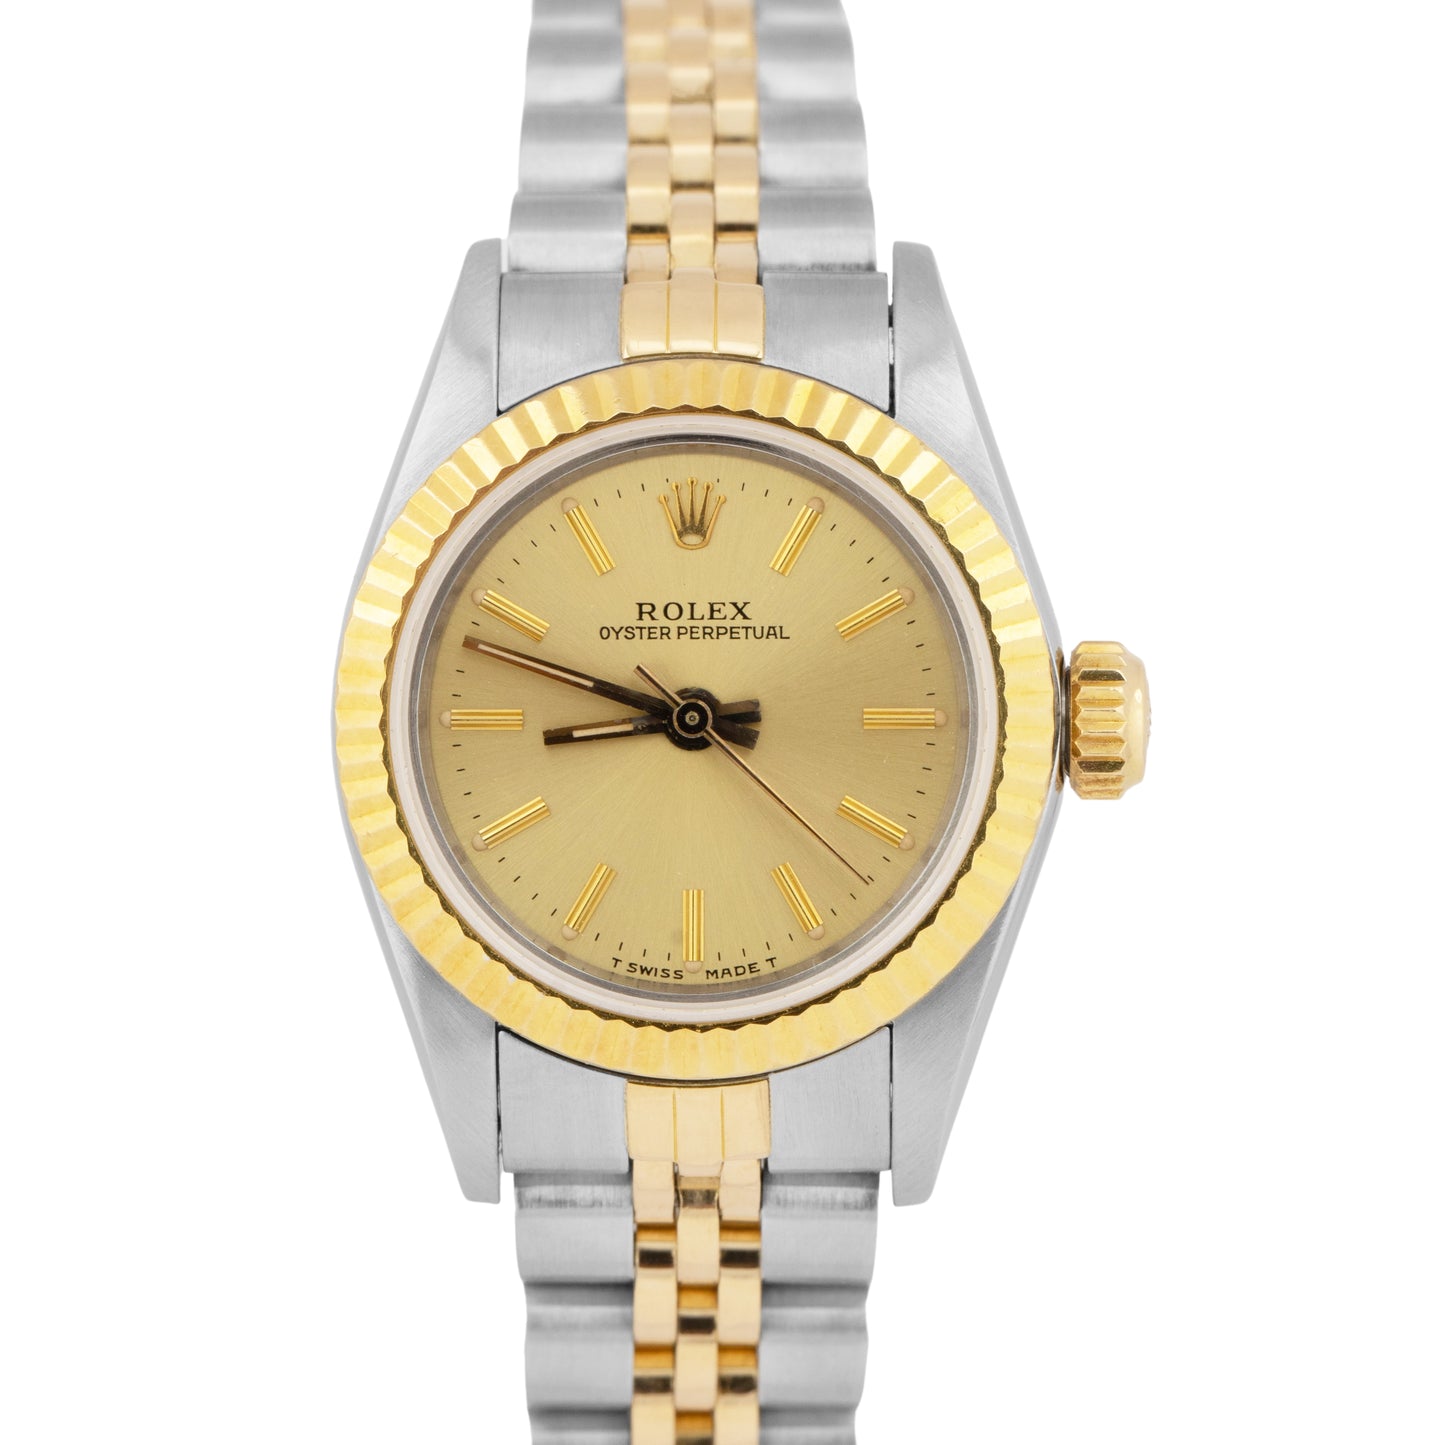 Rolex Oyster Perpetual 24mm Two-Tone Yellow Gold CHAMPAGNE Jubilee Watch 67193